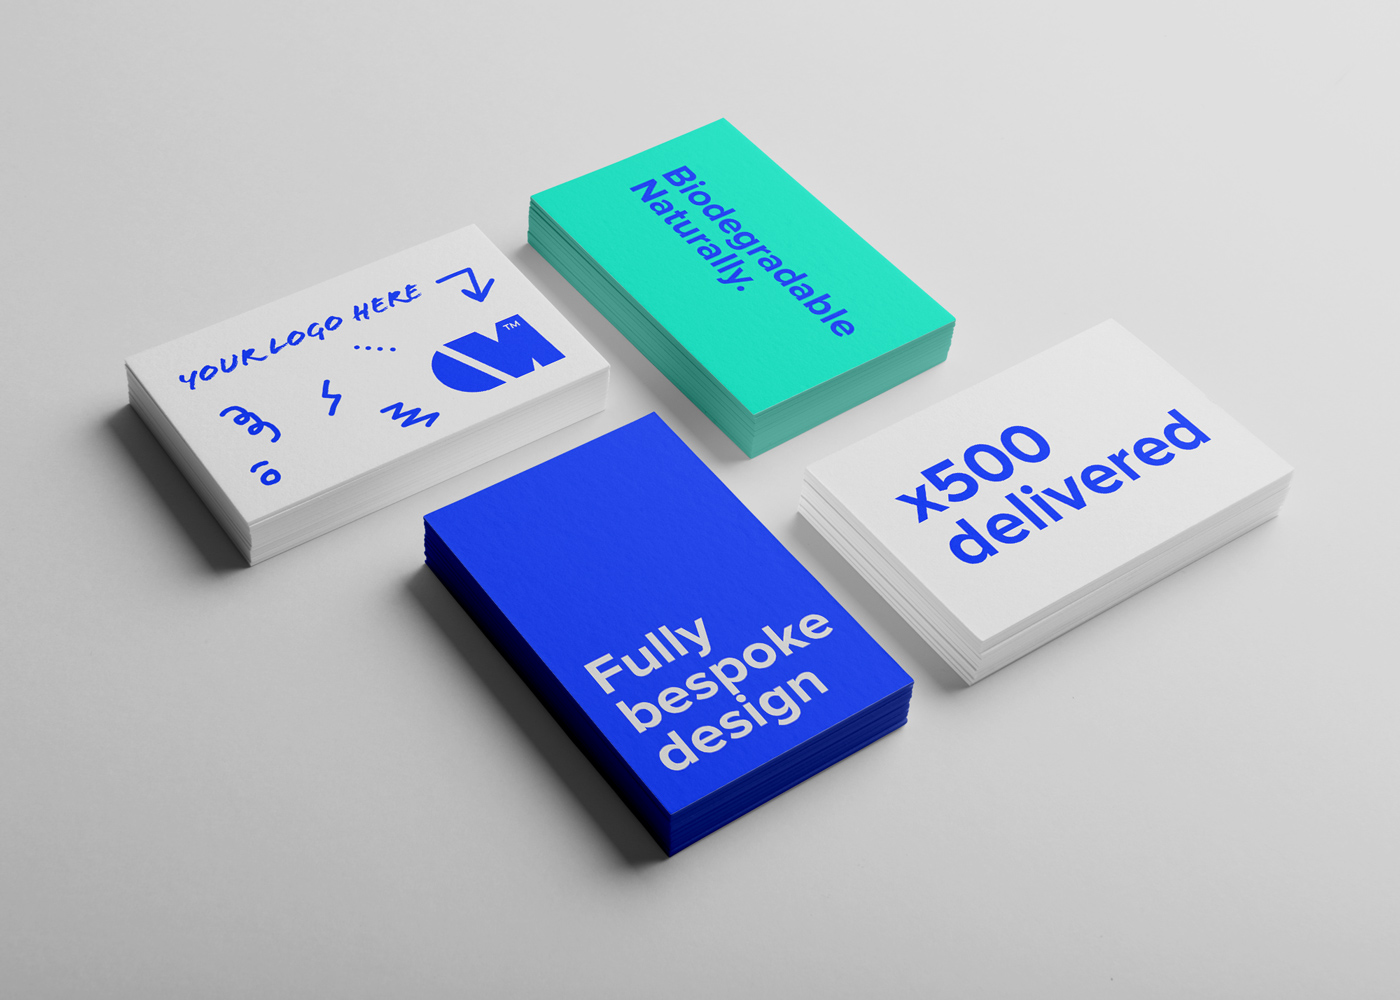 The stand alone Business Card design and delivery package by Oliver Milburn.